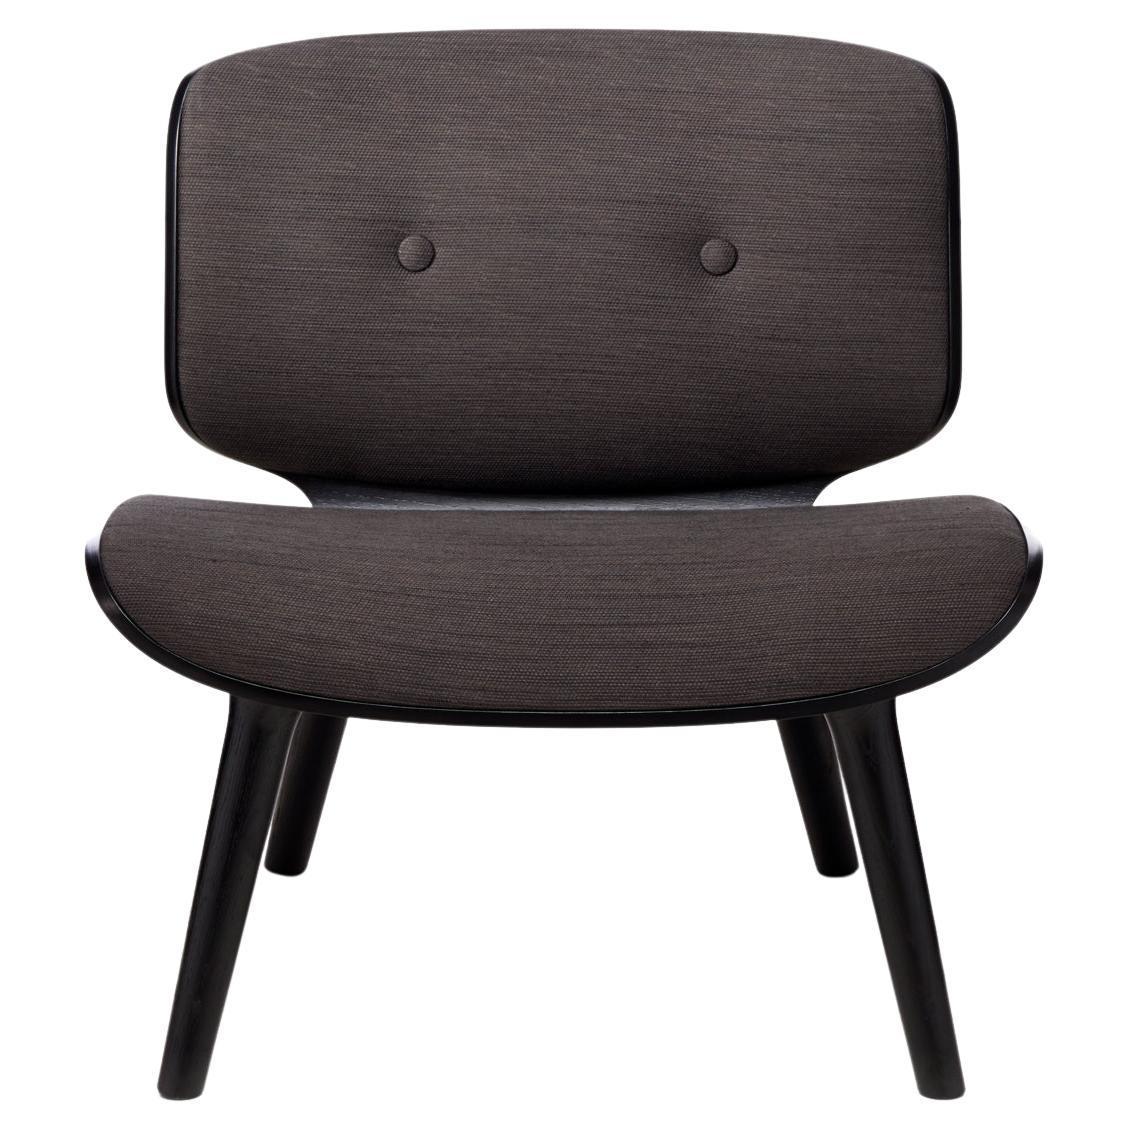 Moooi Nut Lounge Chair in Oray Ray, Chestnut Upholstery with Oak Black Frame